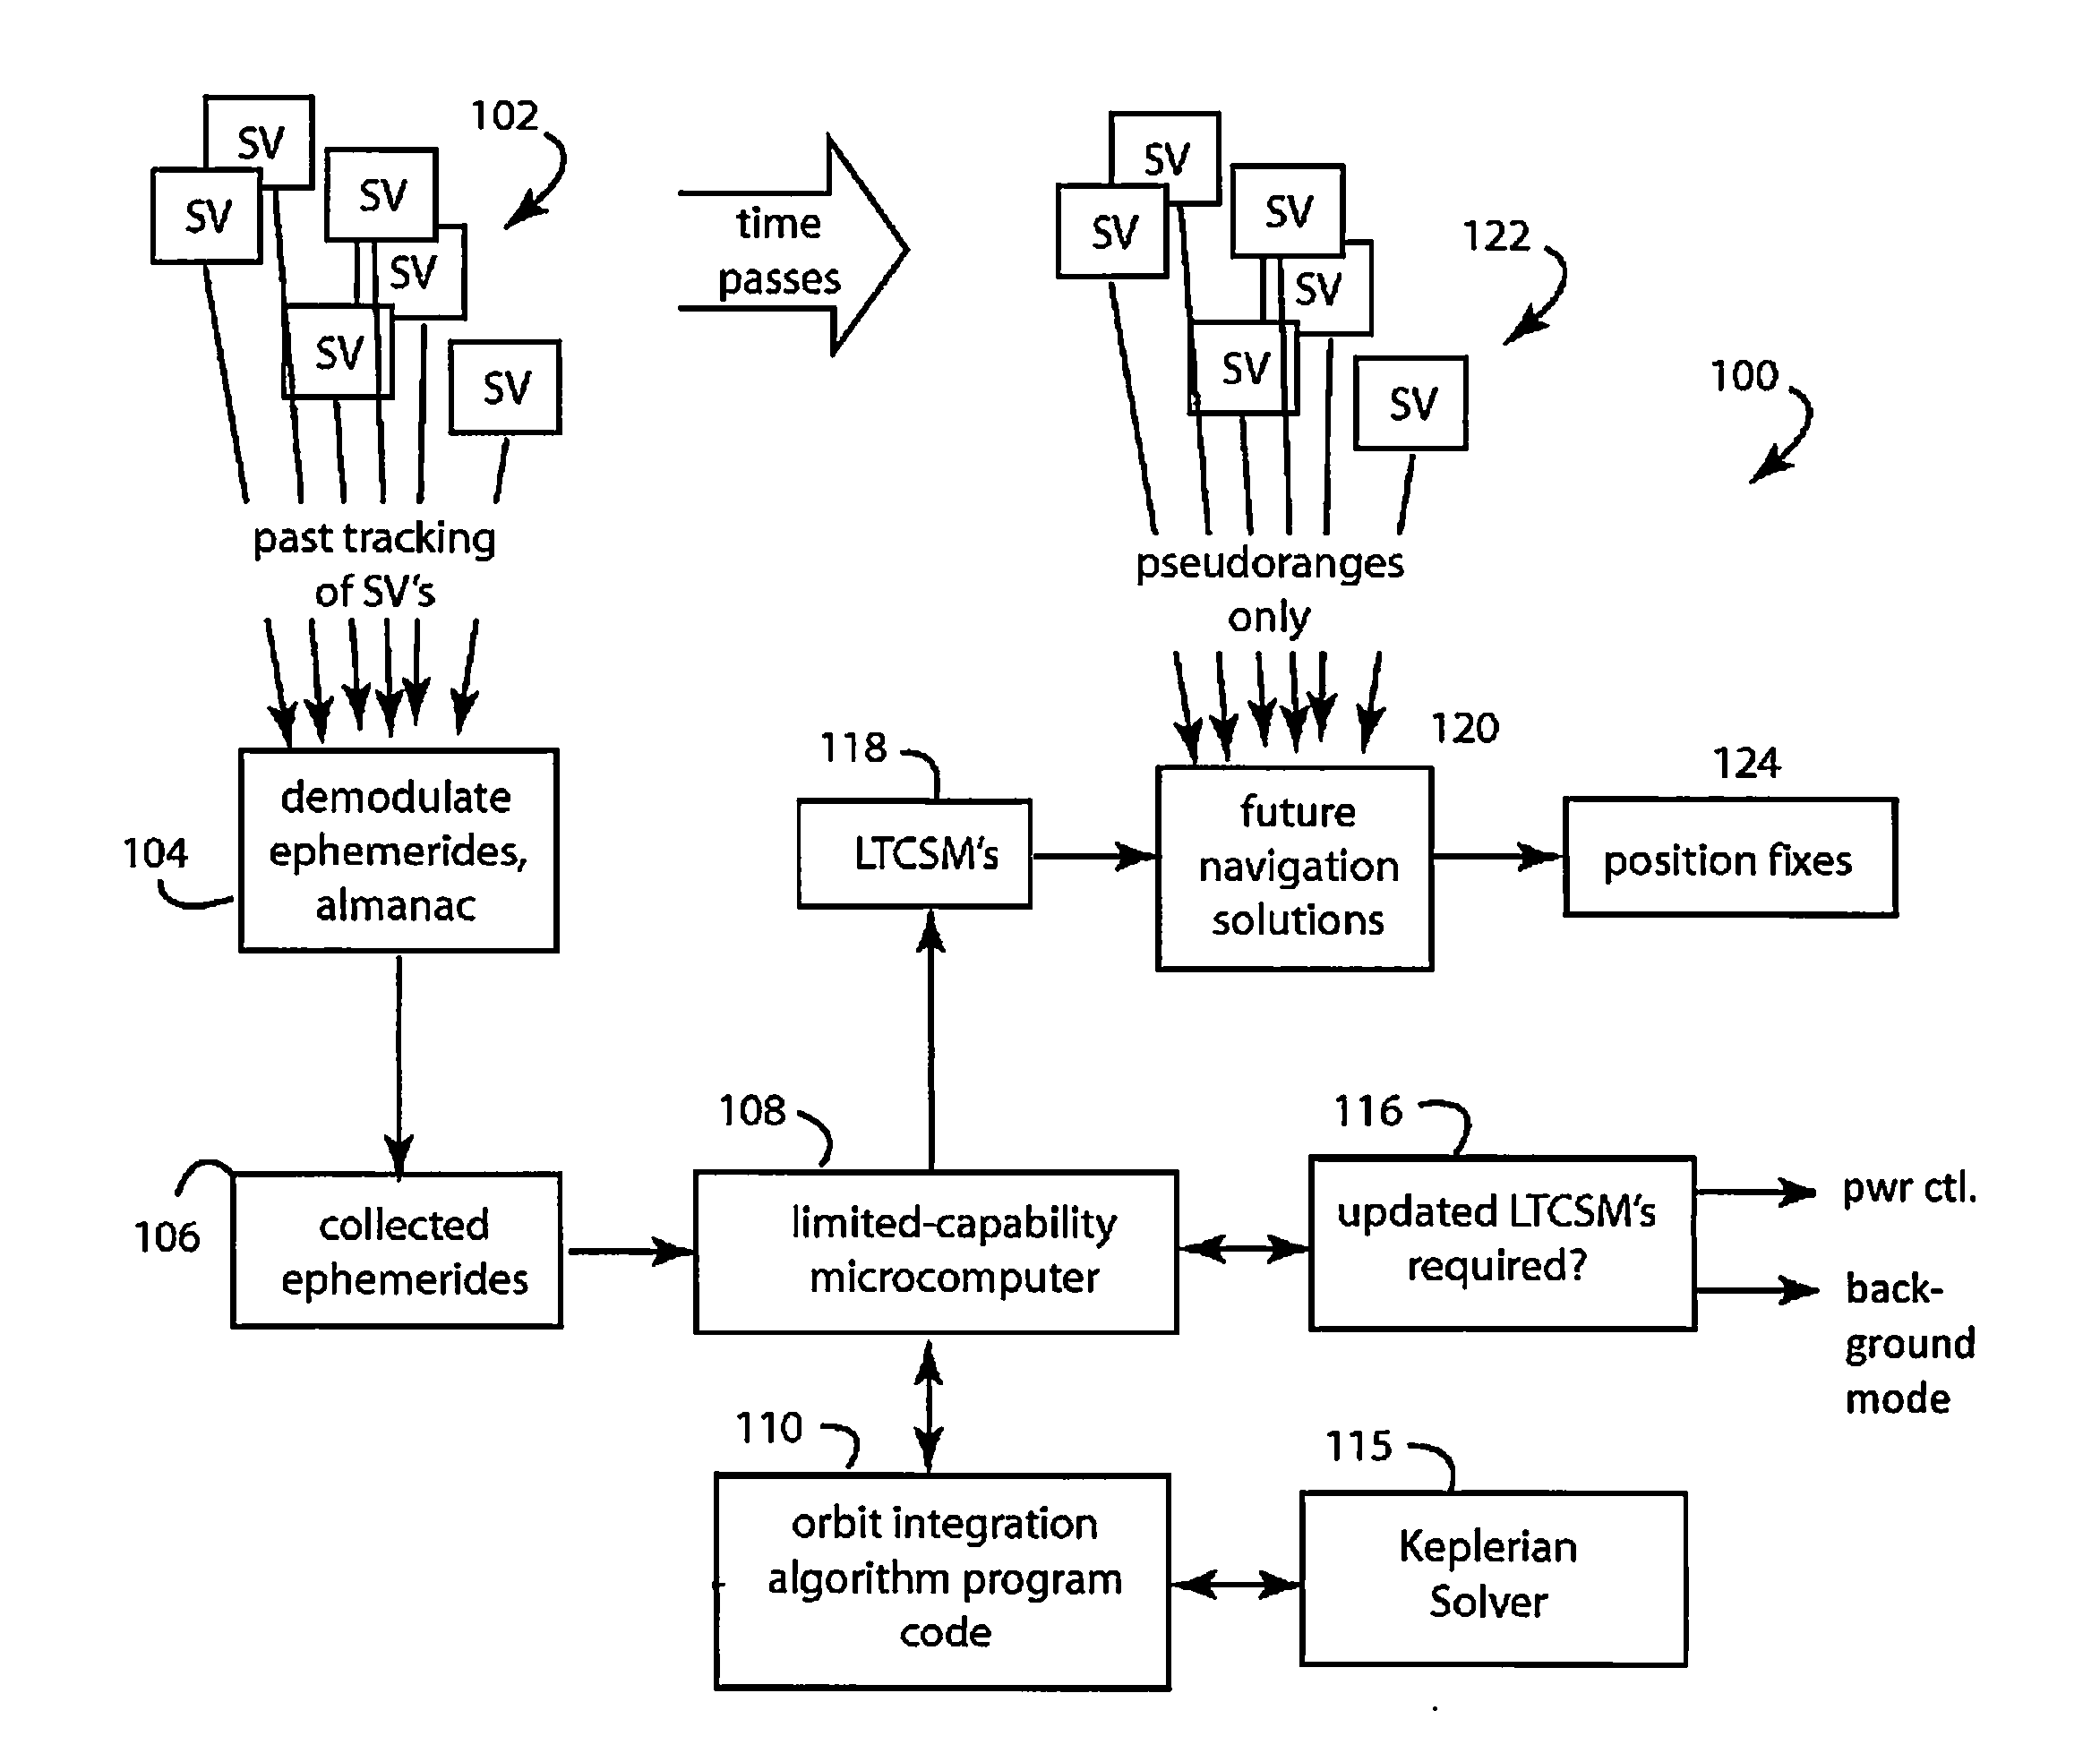 Location determination in multi-system gnns environment using conversion of data into a unified format